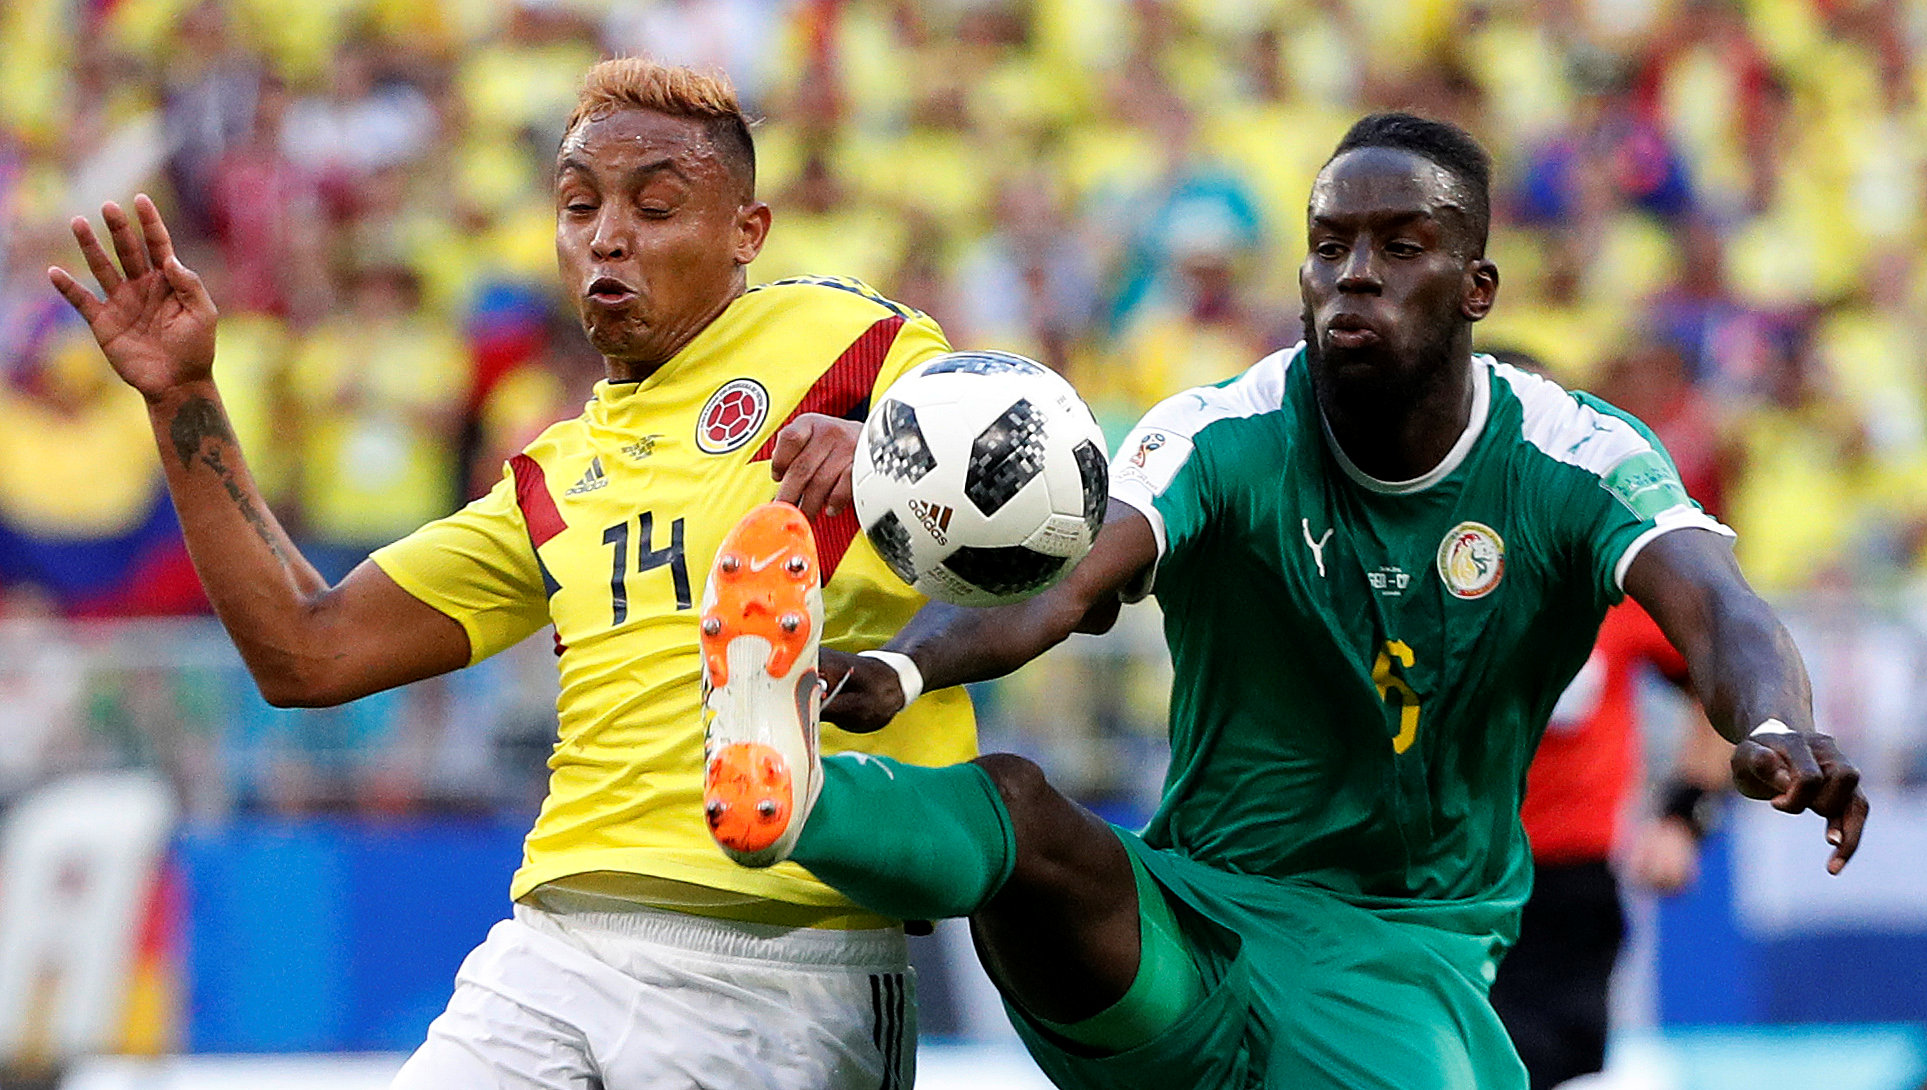 ​Colombia through to last 16 with 1-0 win, Senegal out